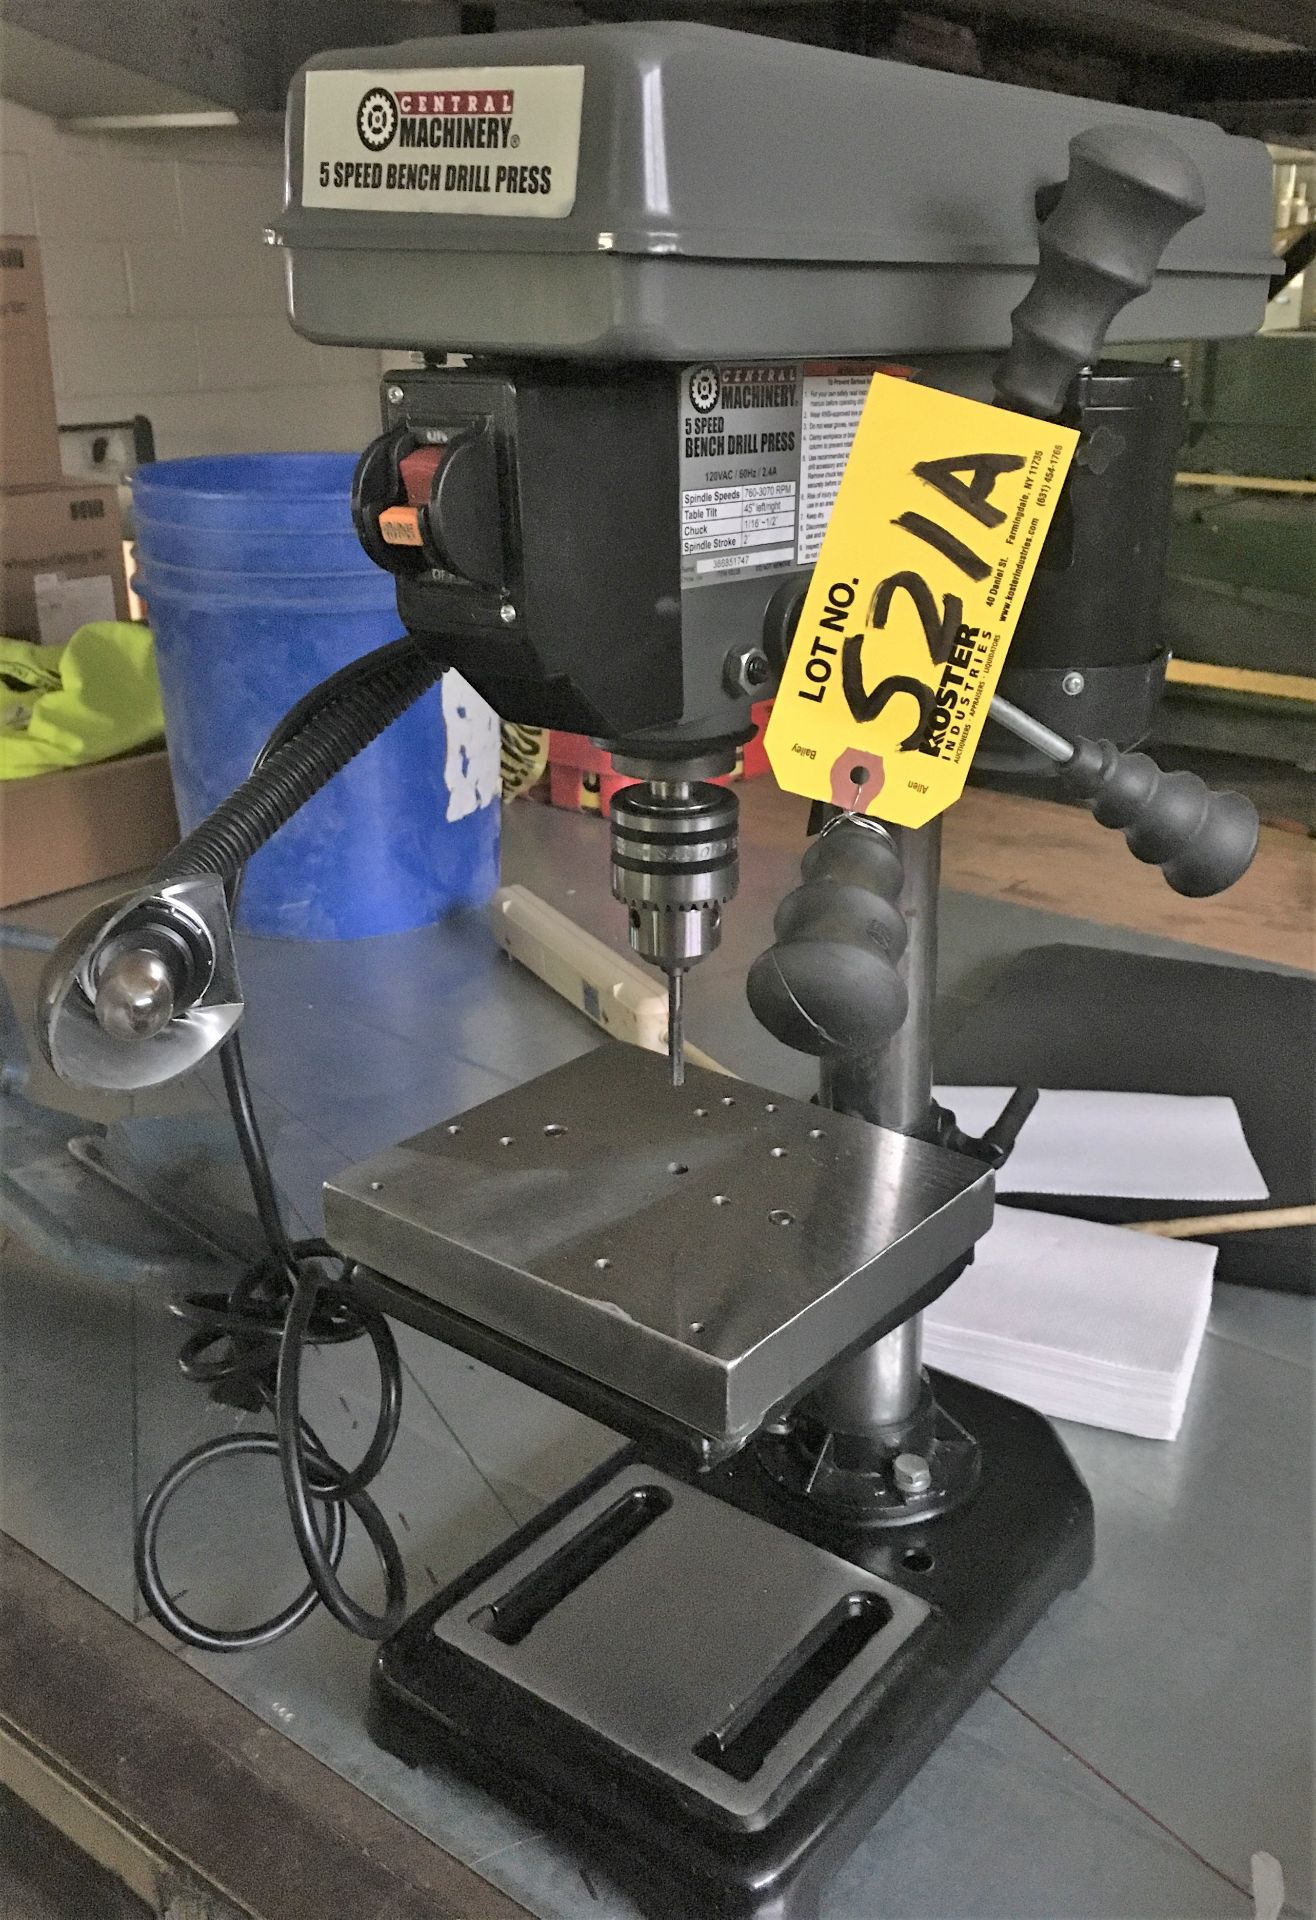 CENTRAL MACHINERY 5-SPEED 8" BENCH TOP DRILL PRESS, 760-3070 RPM, 2" SPINDLE STROKE, S/N: 366851747